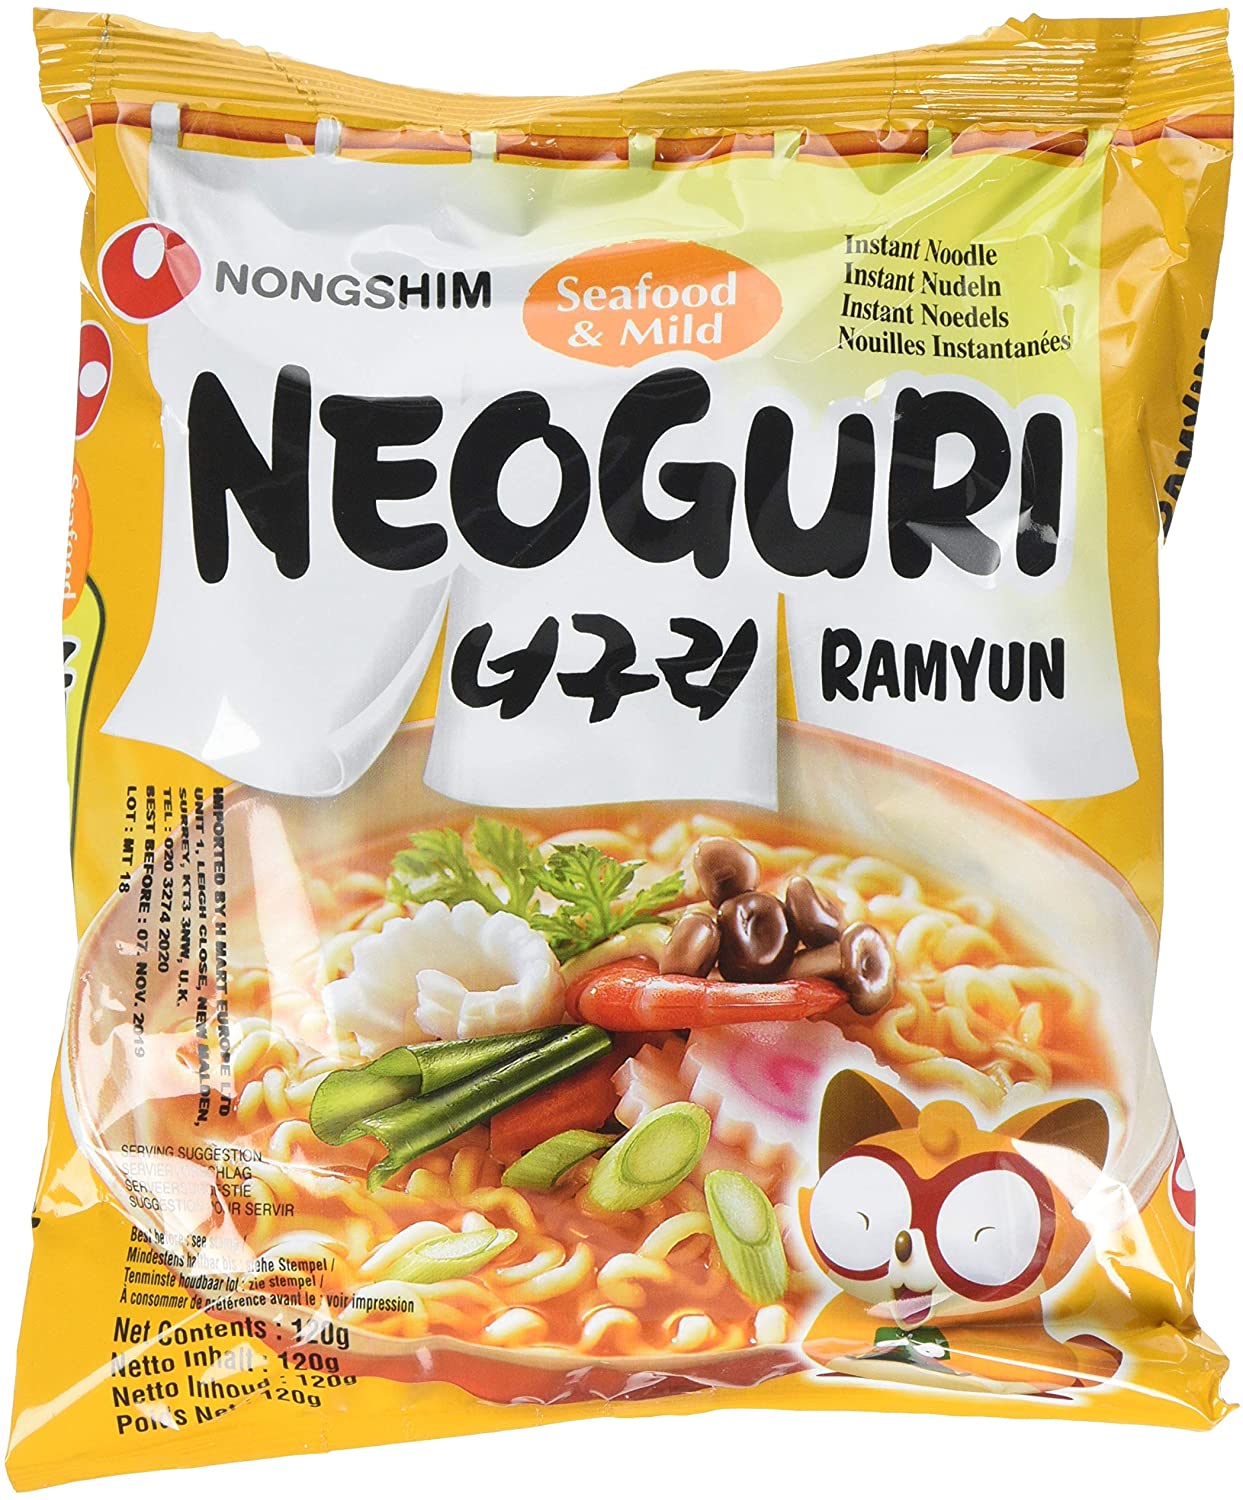 Neoguri Seafood and Mild Instant Noodles Ramyun 120g x 20 (1 box) by Nongshim